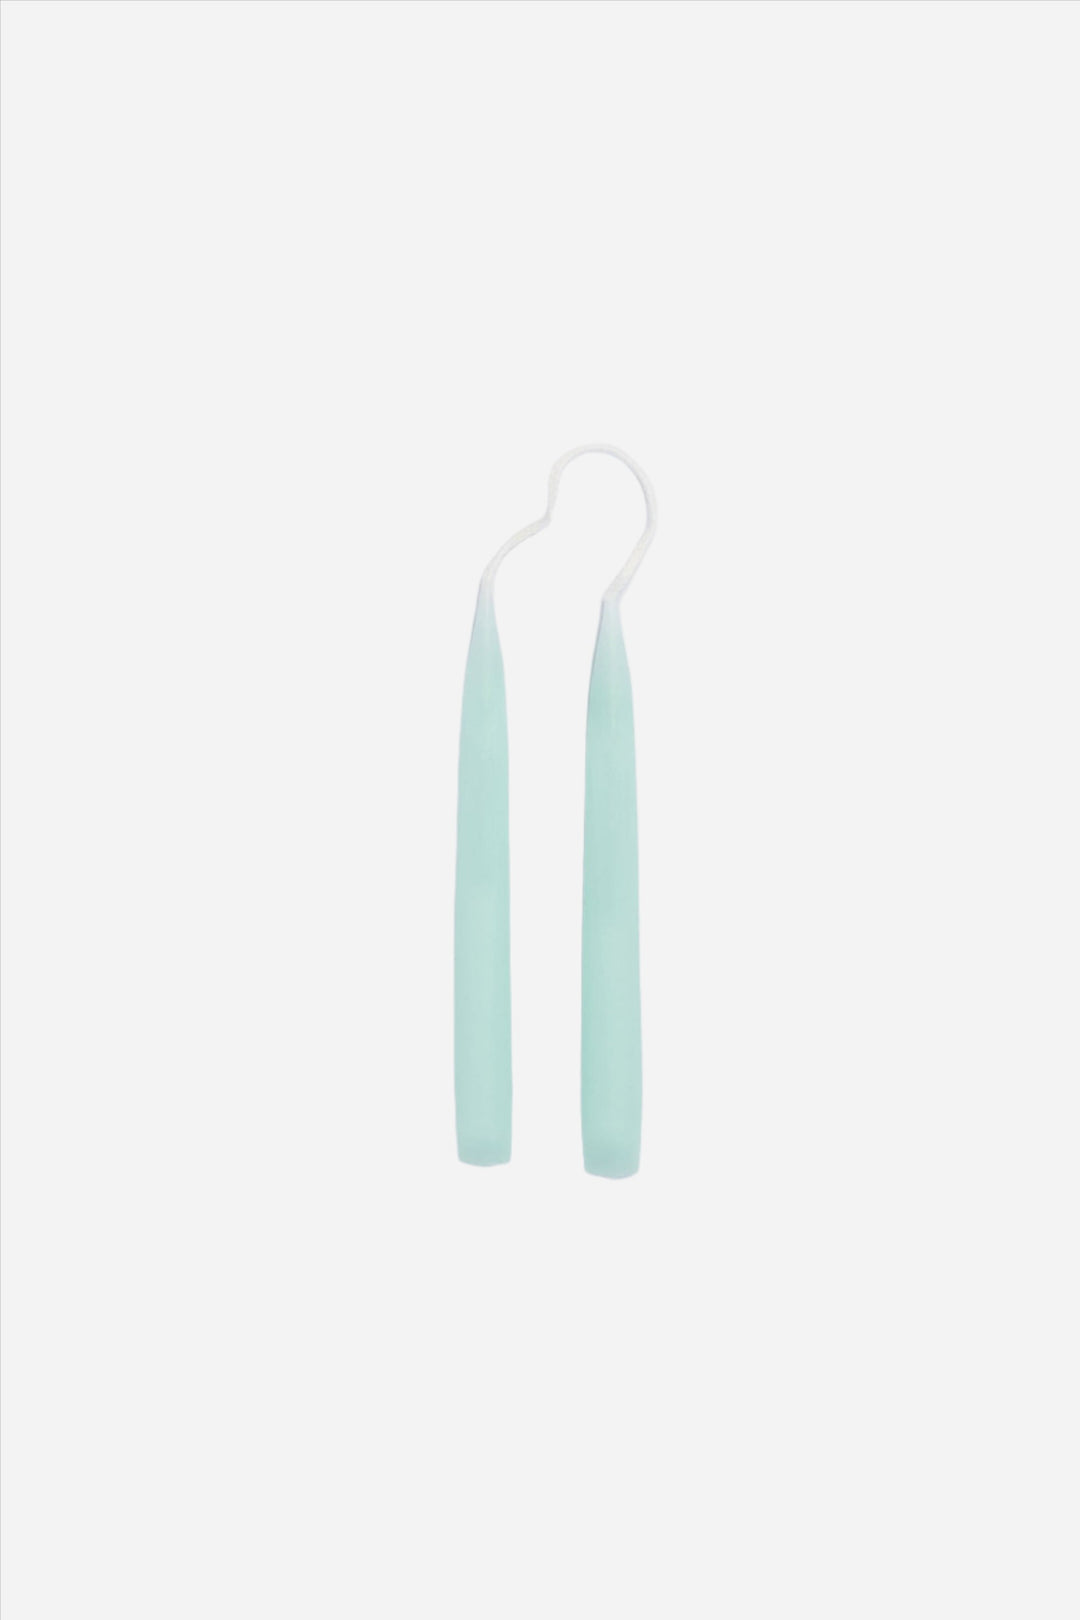 Small Pair of Candle / Mint Green